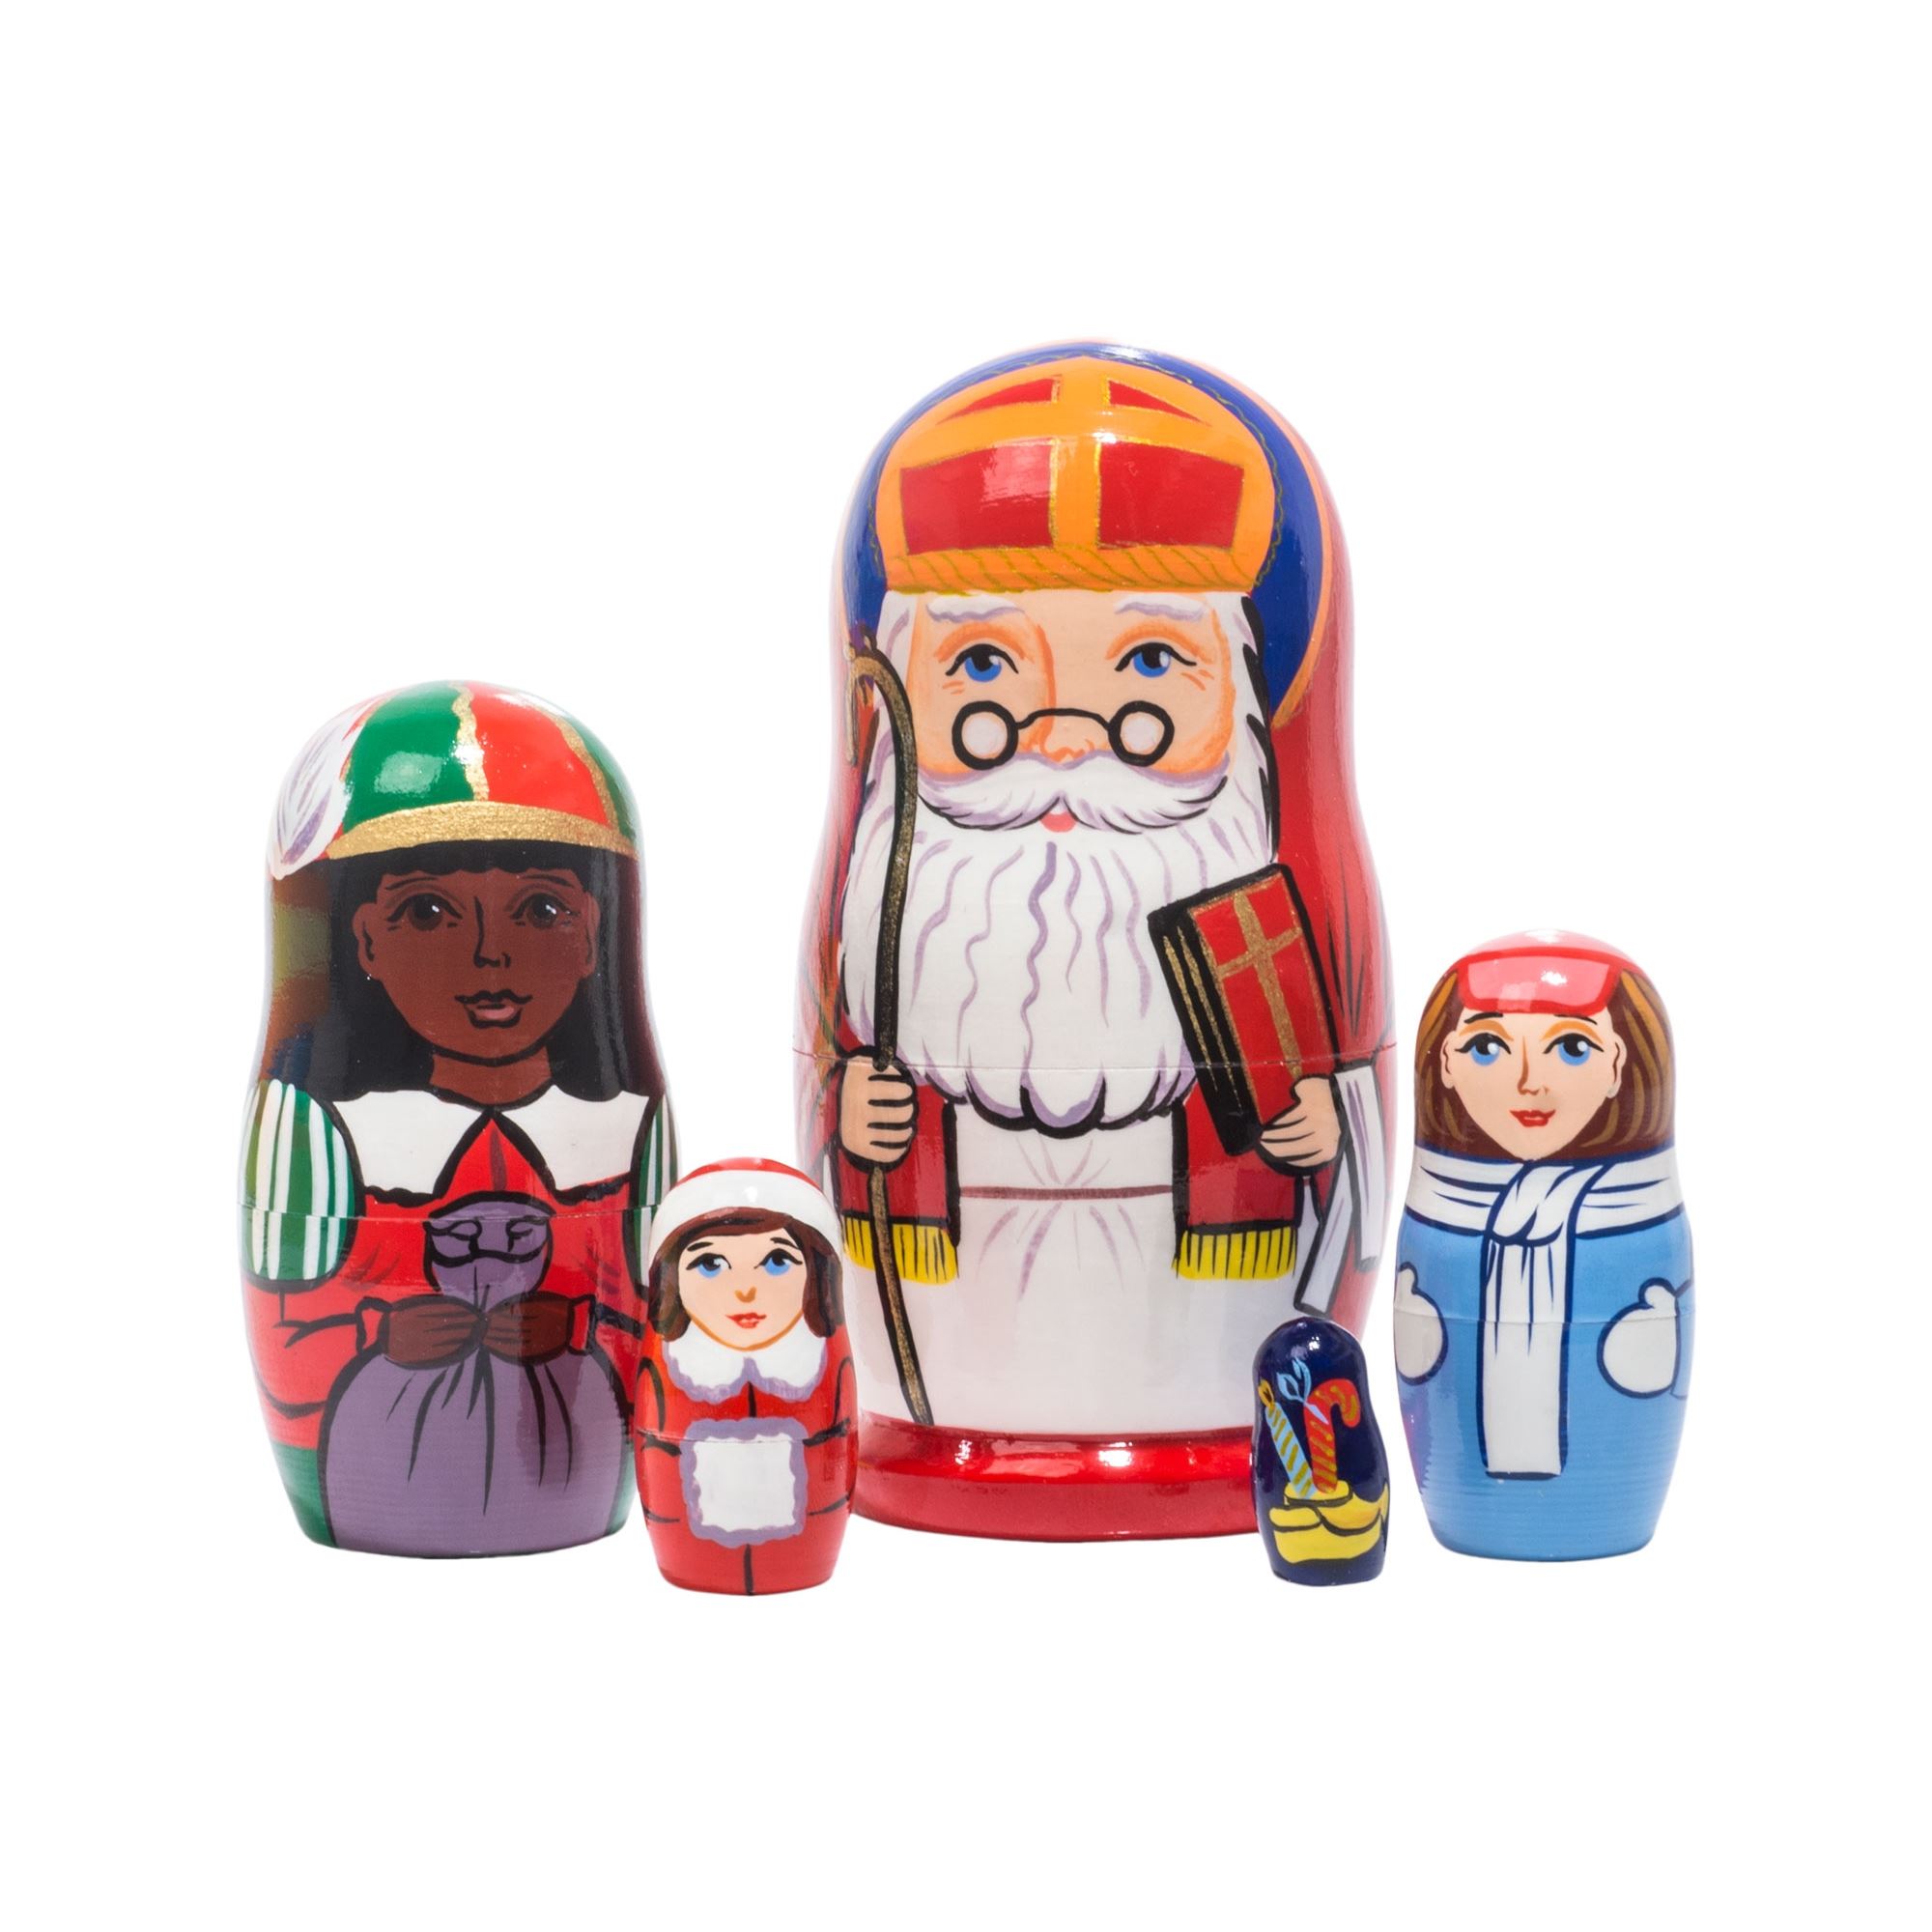 St. Nicholas 4" Nesting Doll Set of 5 from Russia